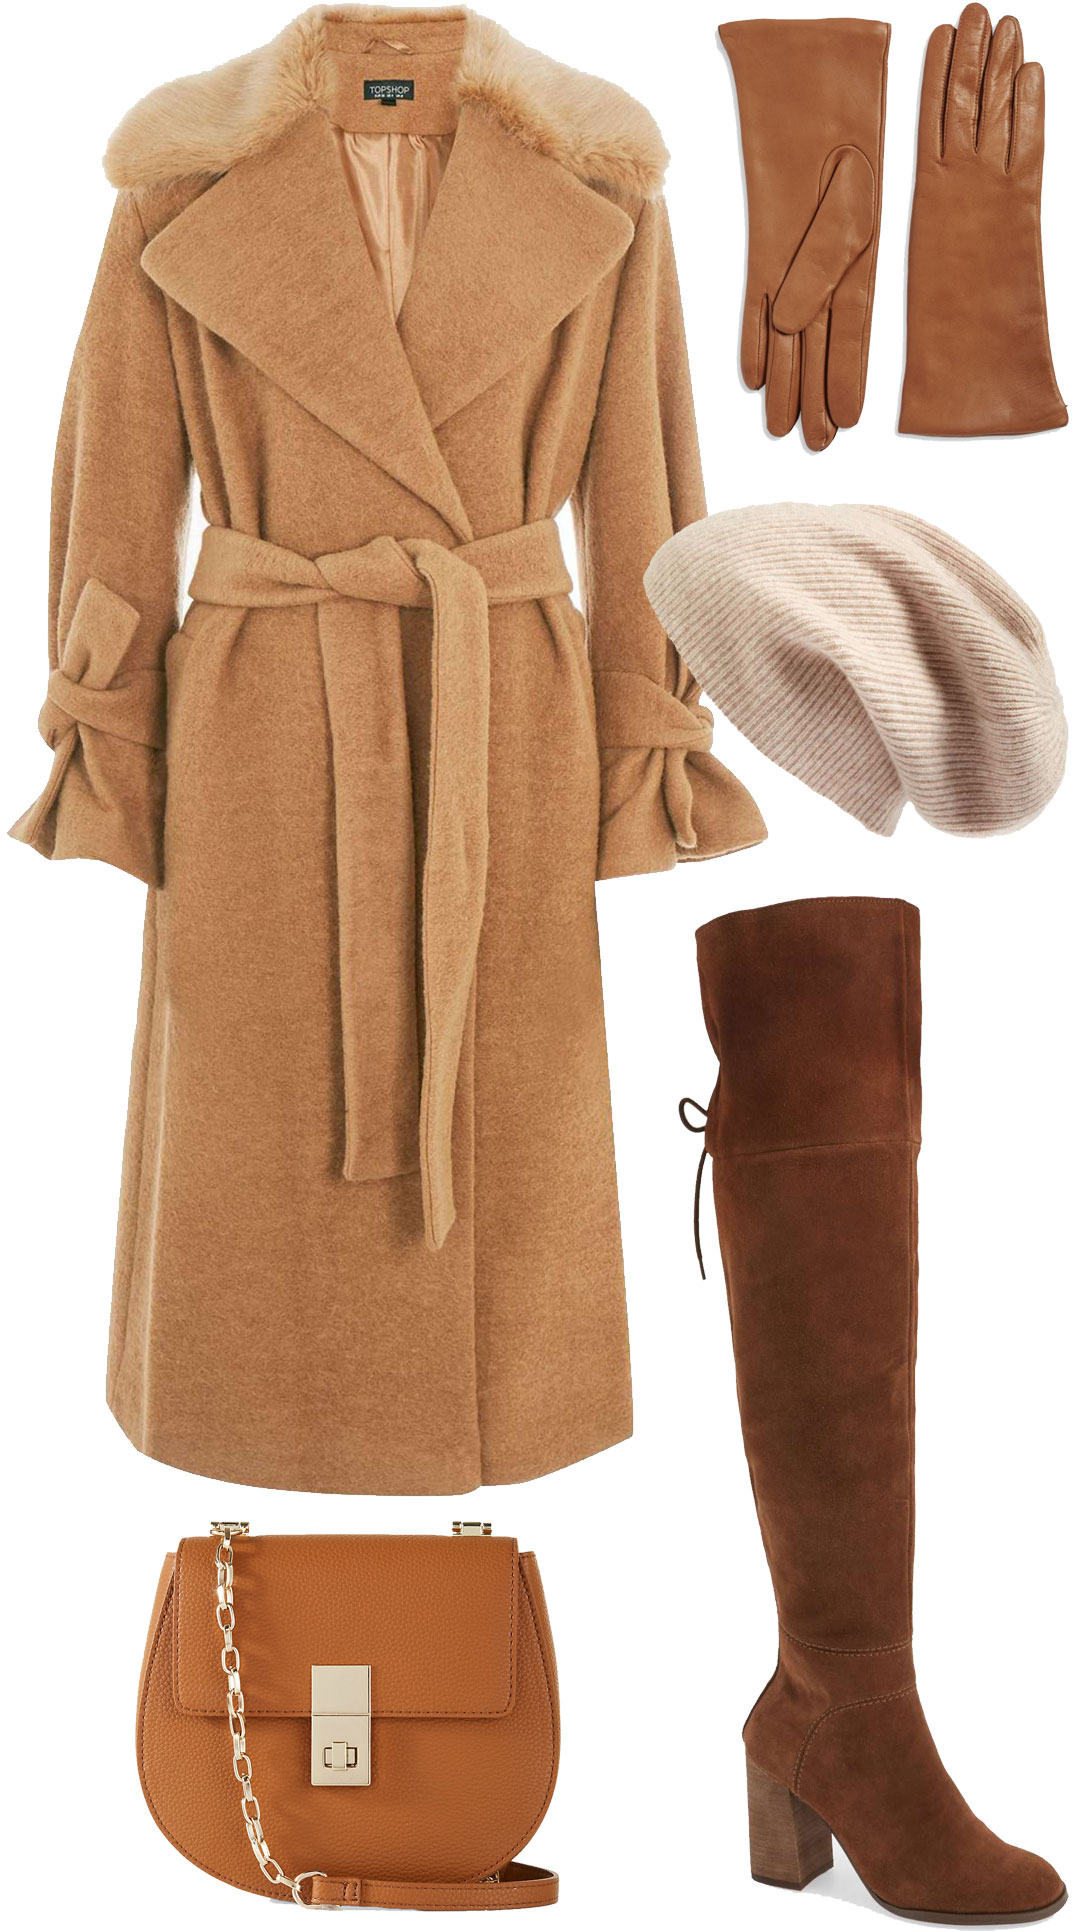 Meghan Markle wears a camel wrap coat by Sentaler with Stuart Weitzman boots and Chloe bag. Get the look for less!